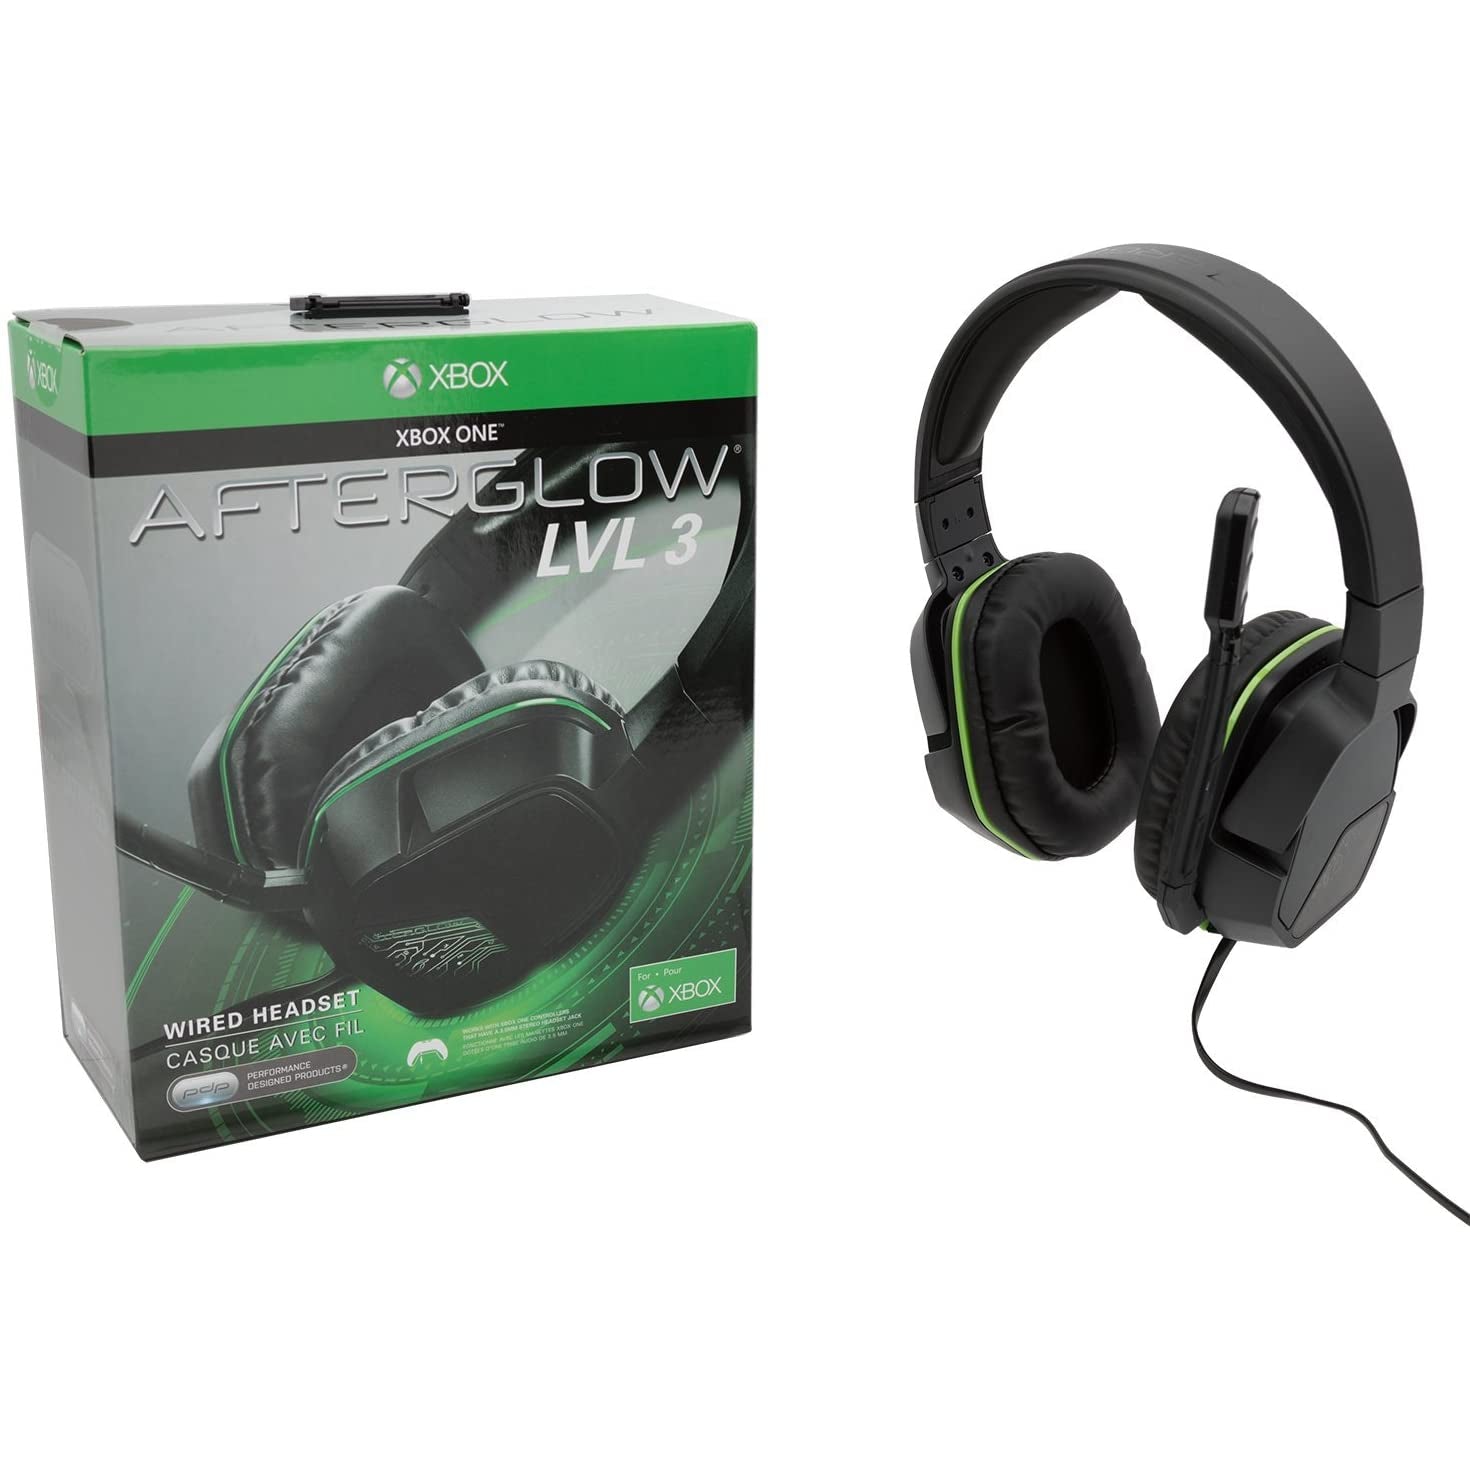 Afterglow LVL 3 Stereo Headset for Xbox One, Black and Green